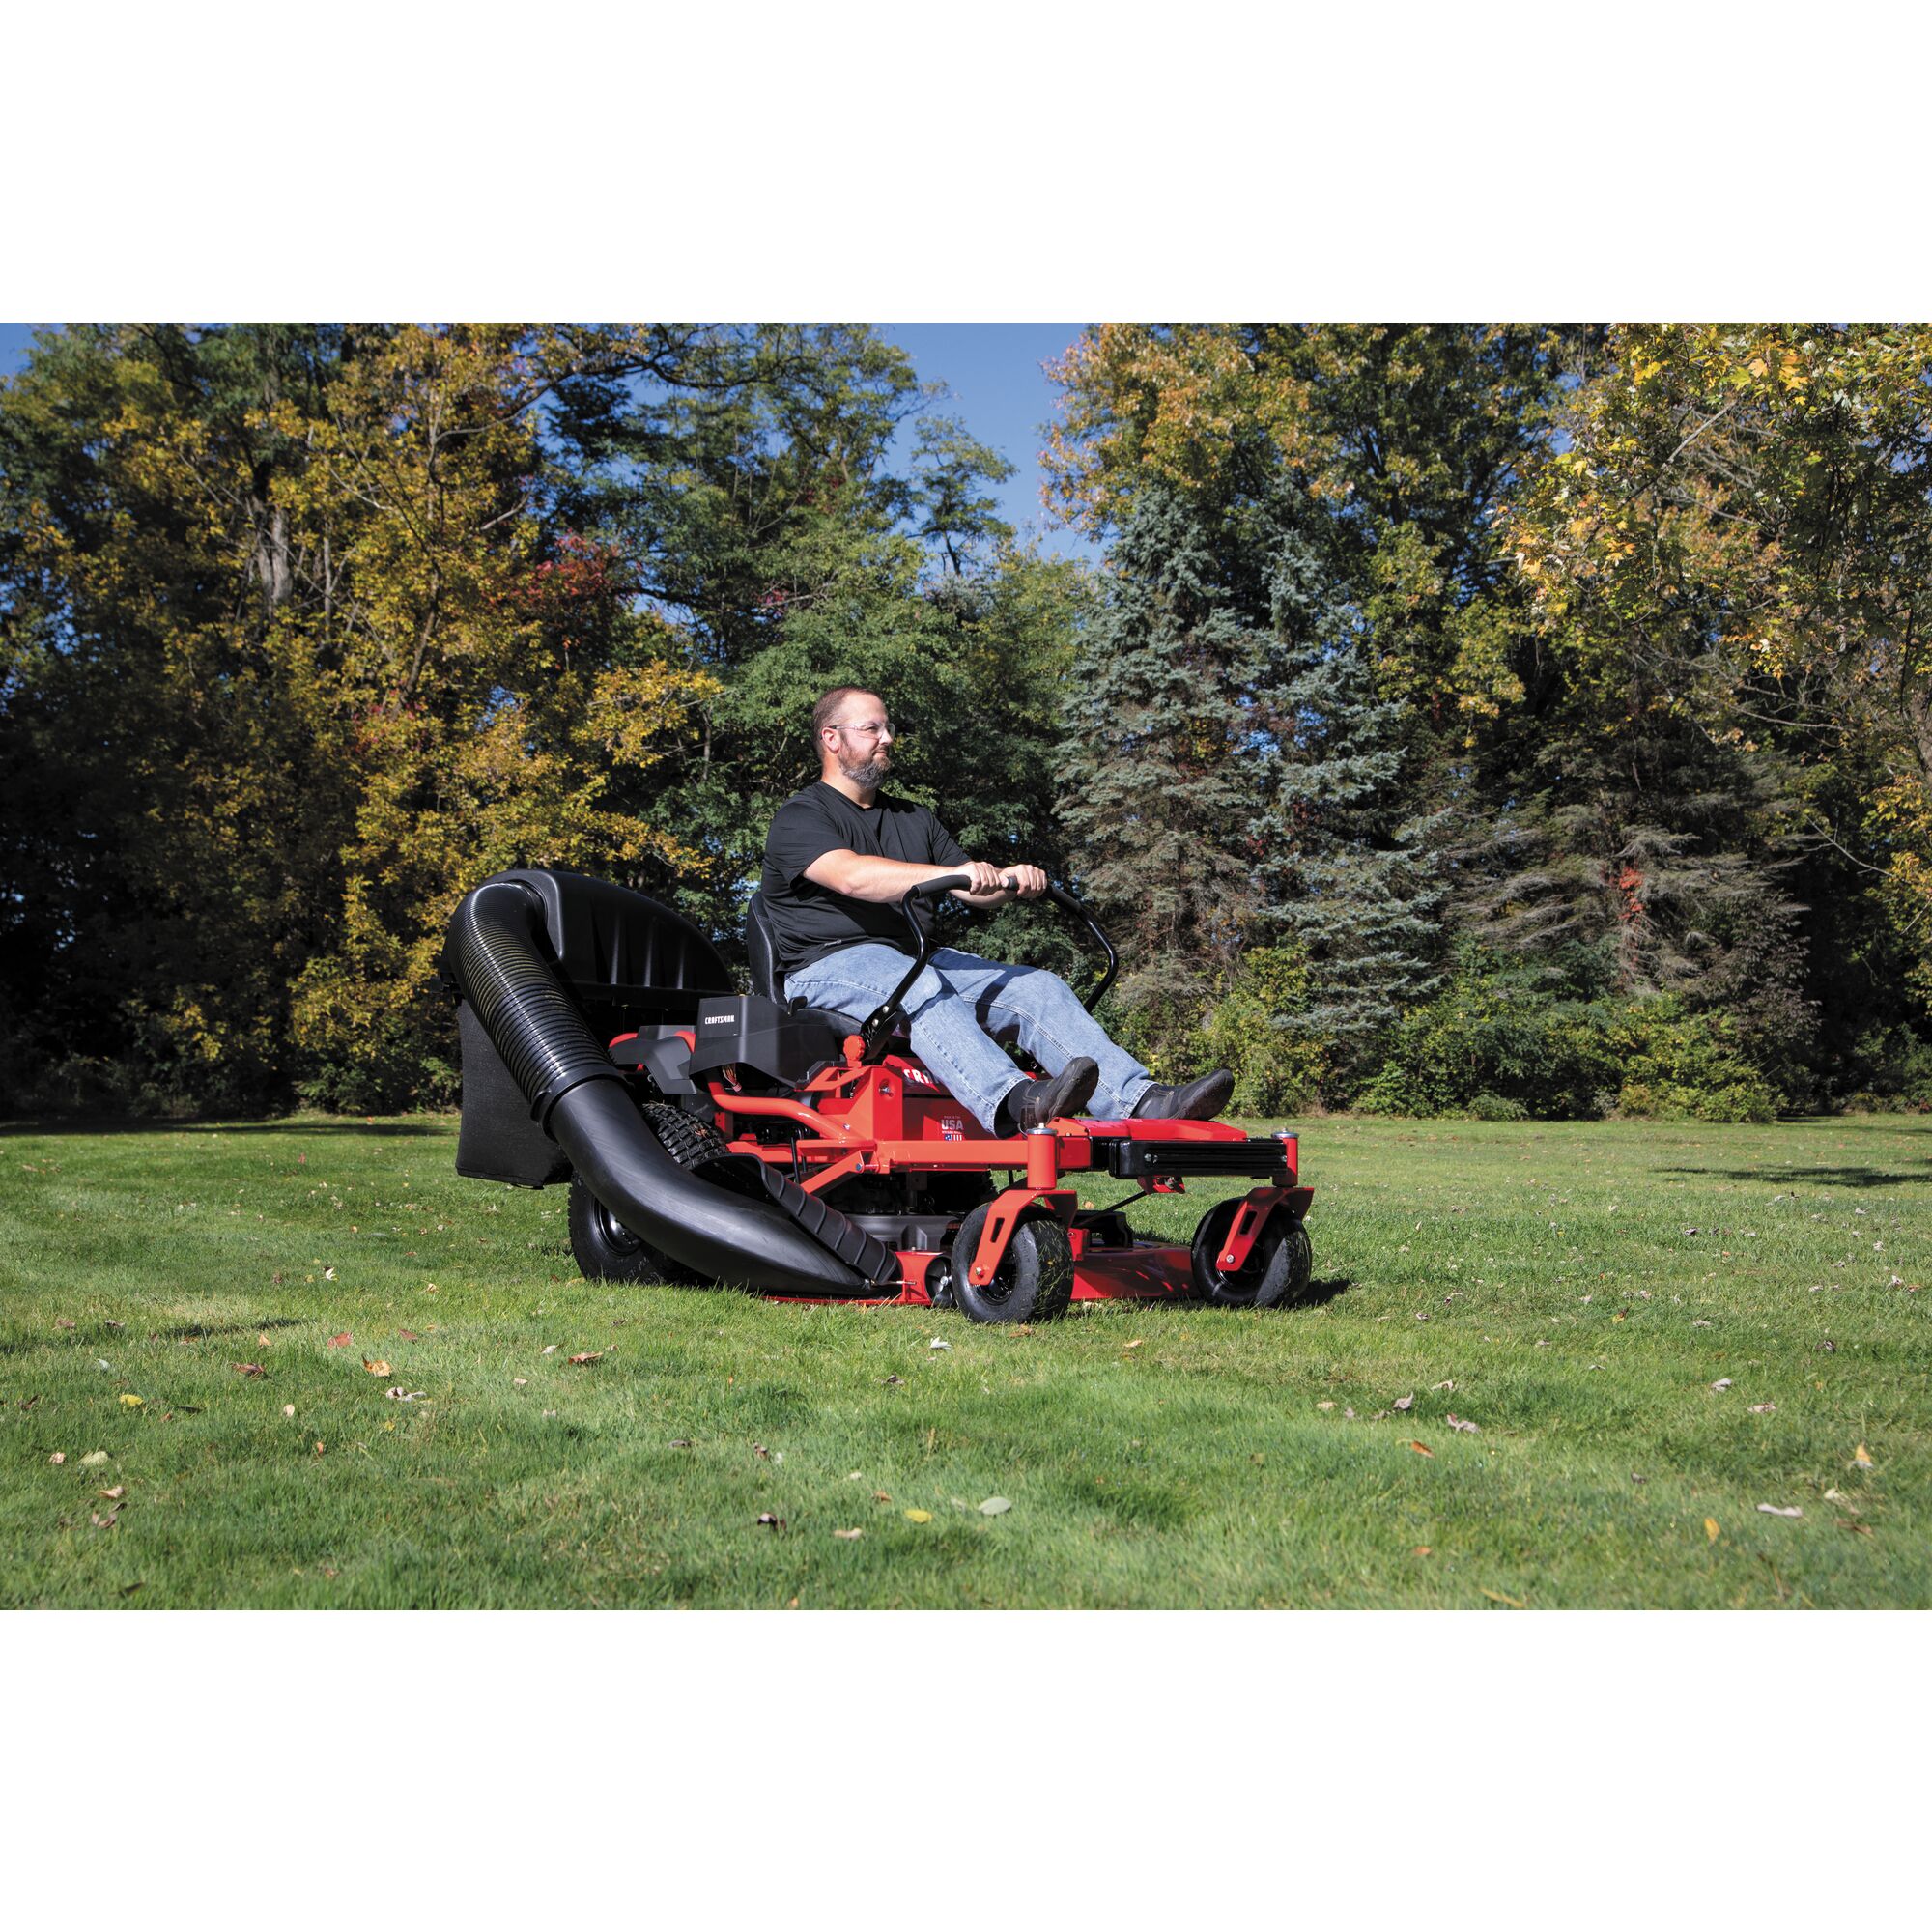 42 inch and 46 inch zero turn double bagger being used to cut grass by person.